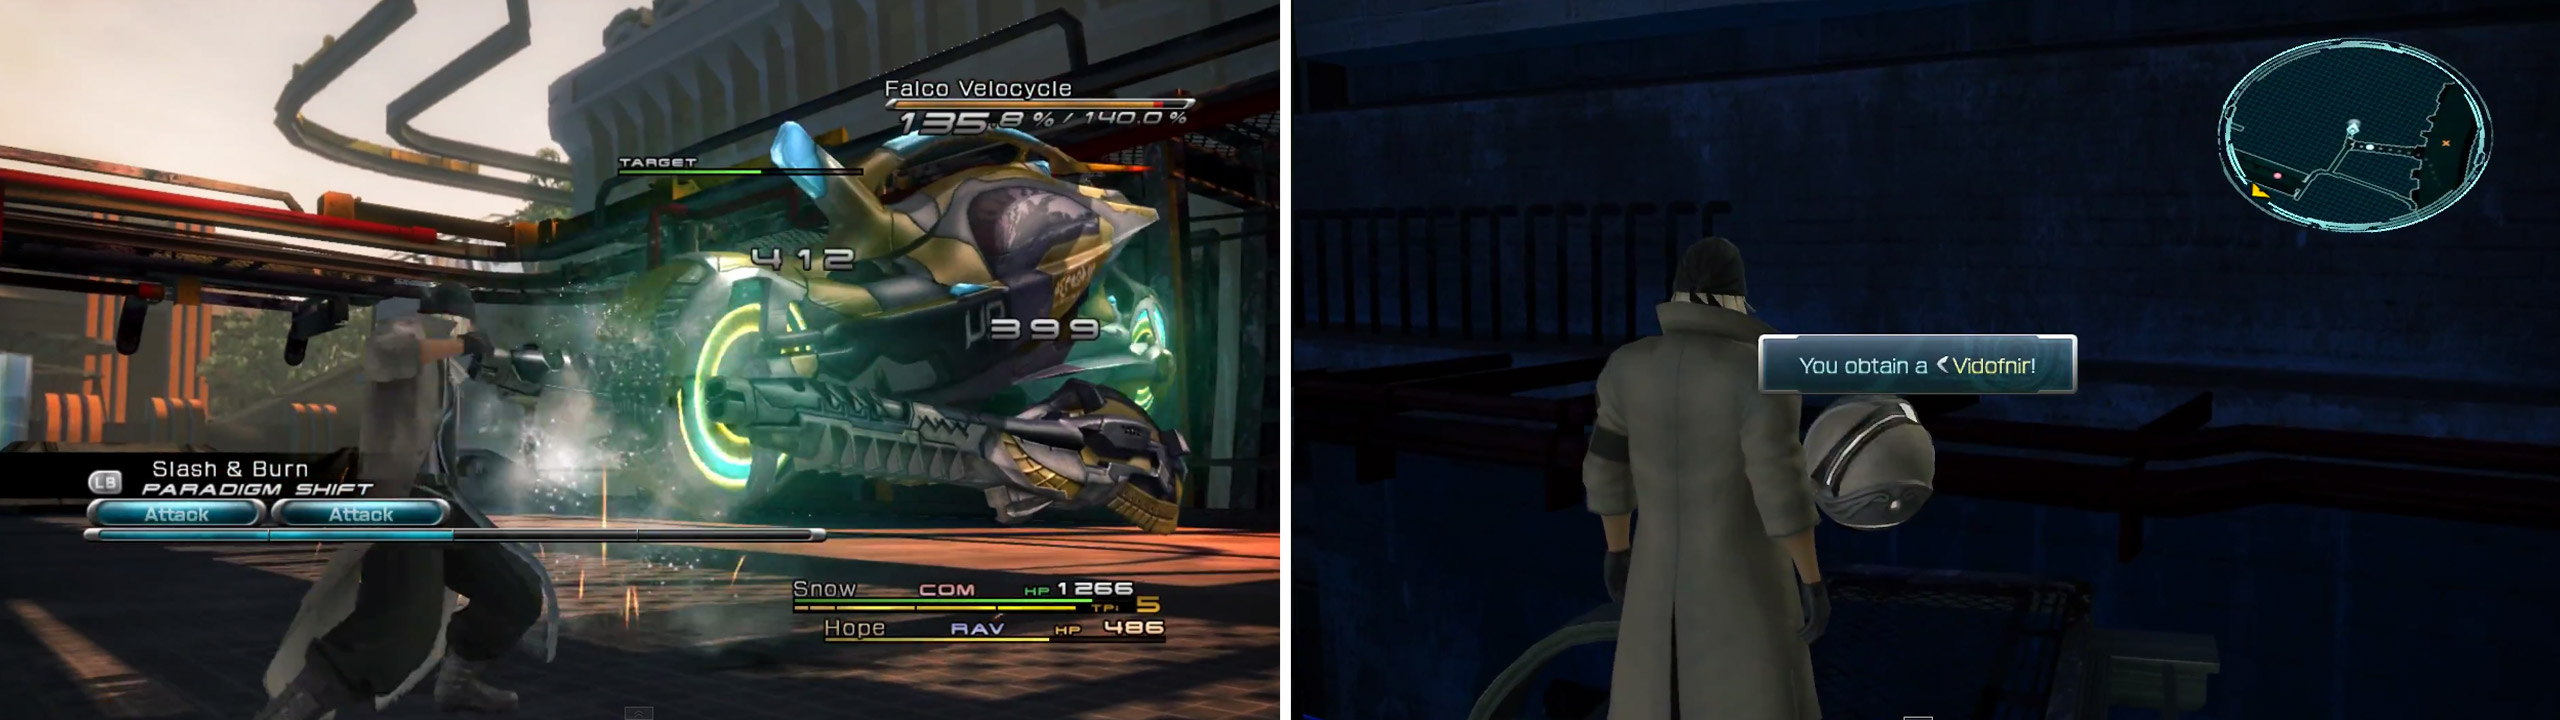 The Falco Velocycle is a powerful adversary (left). Vidofnir location (right).